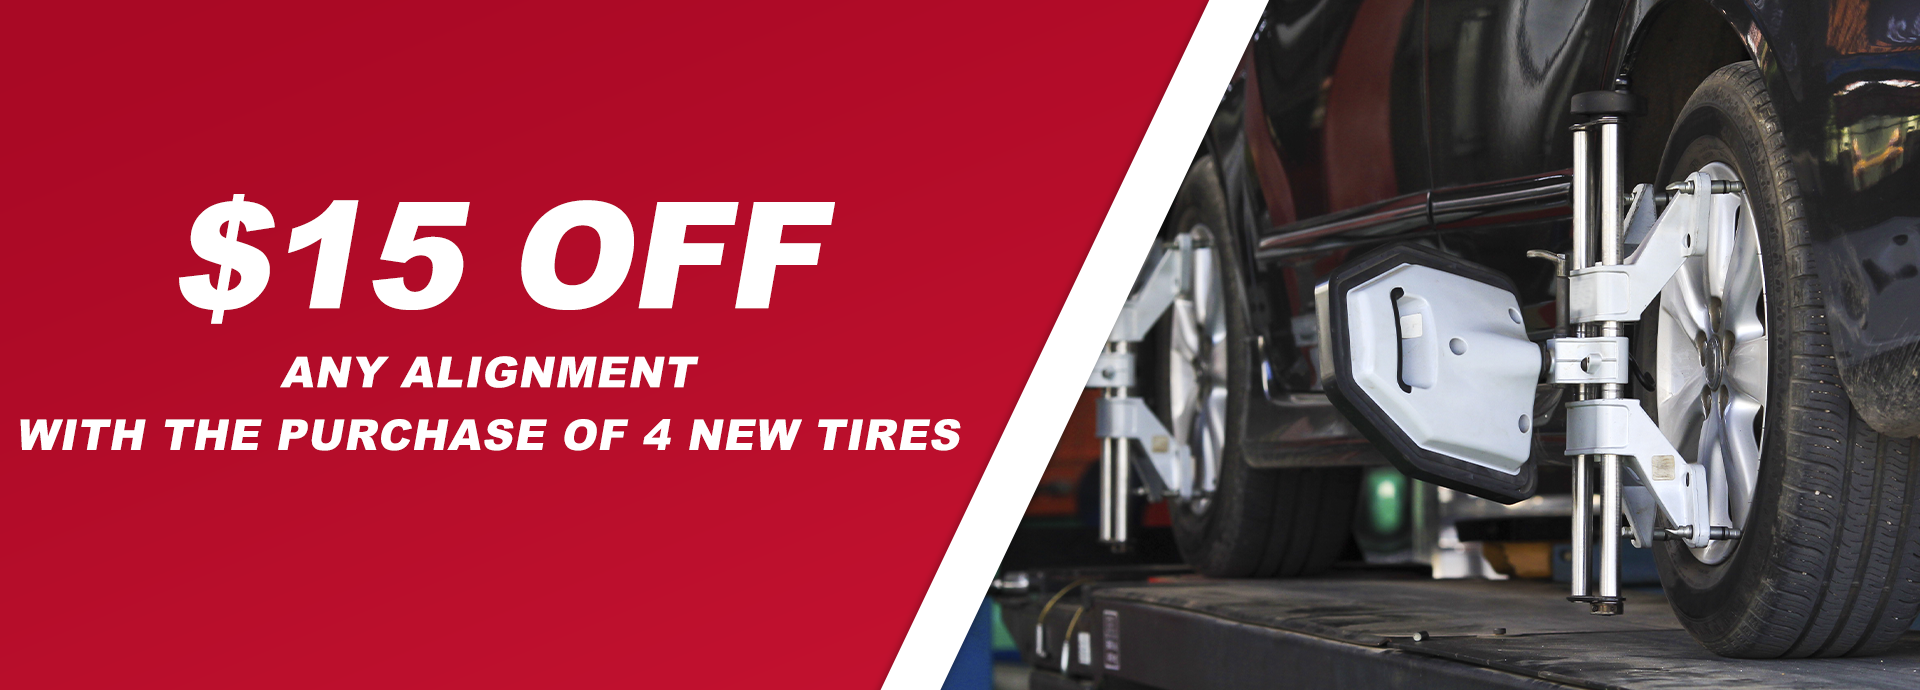 $15 Off any alignment